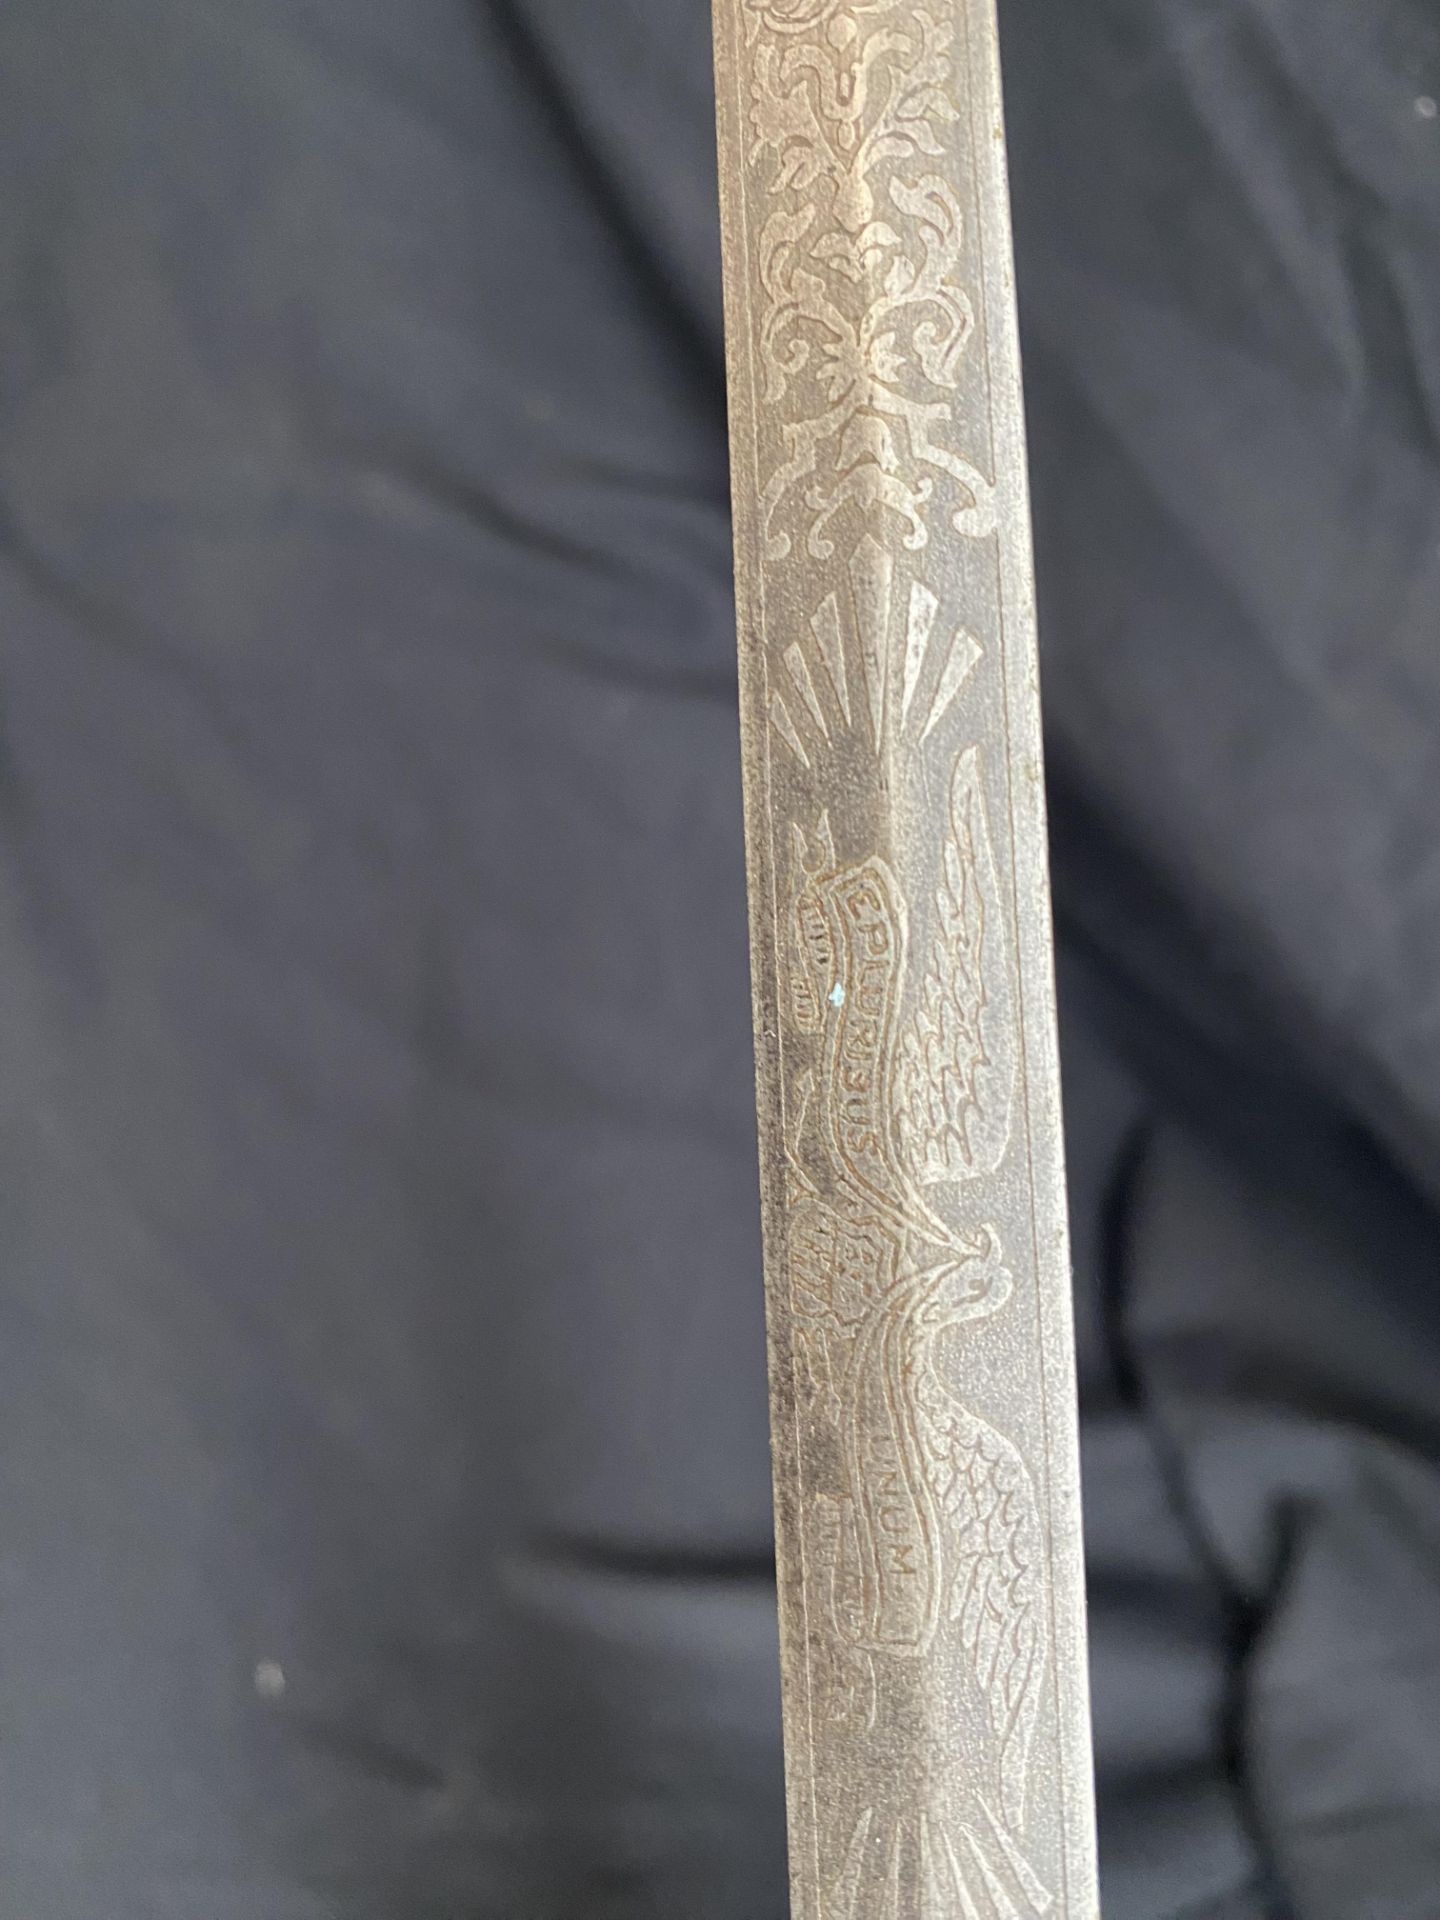 US G.A.R. Grand Army Republic Engraved Blade Veterans Sound For Age (1890's) 36" - Image 4 of 5